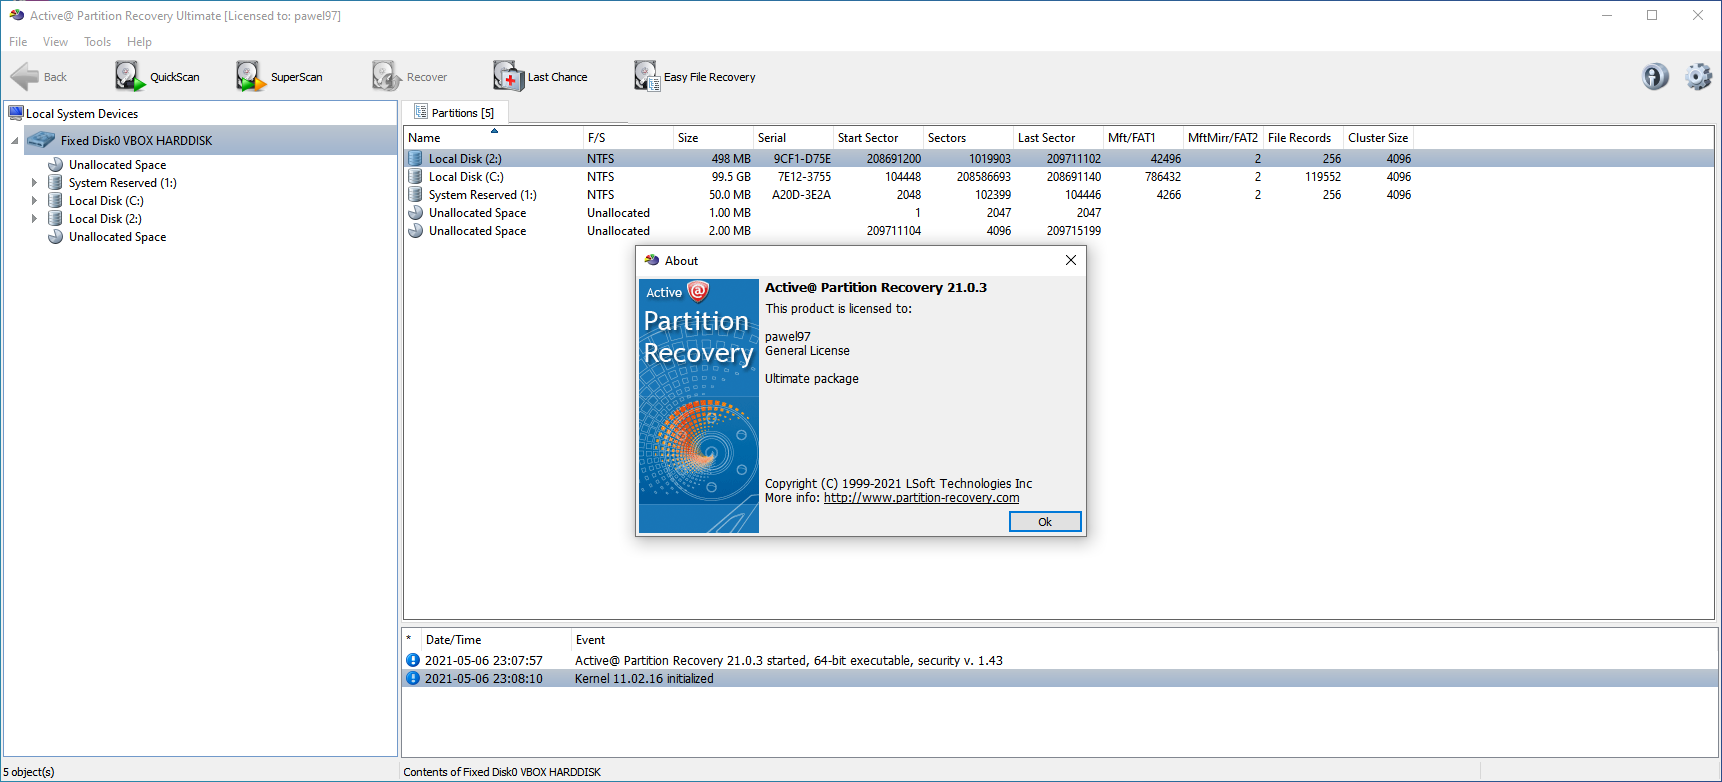 activepartitionrecovery21.0.3